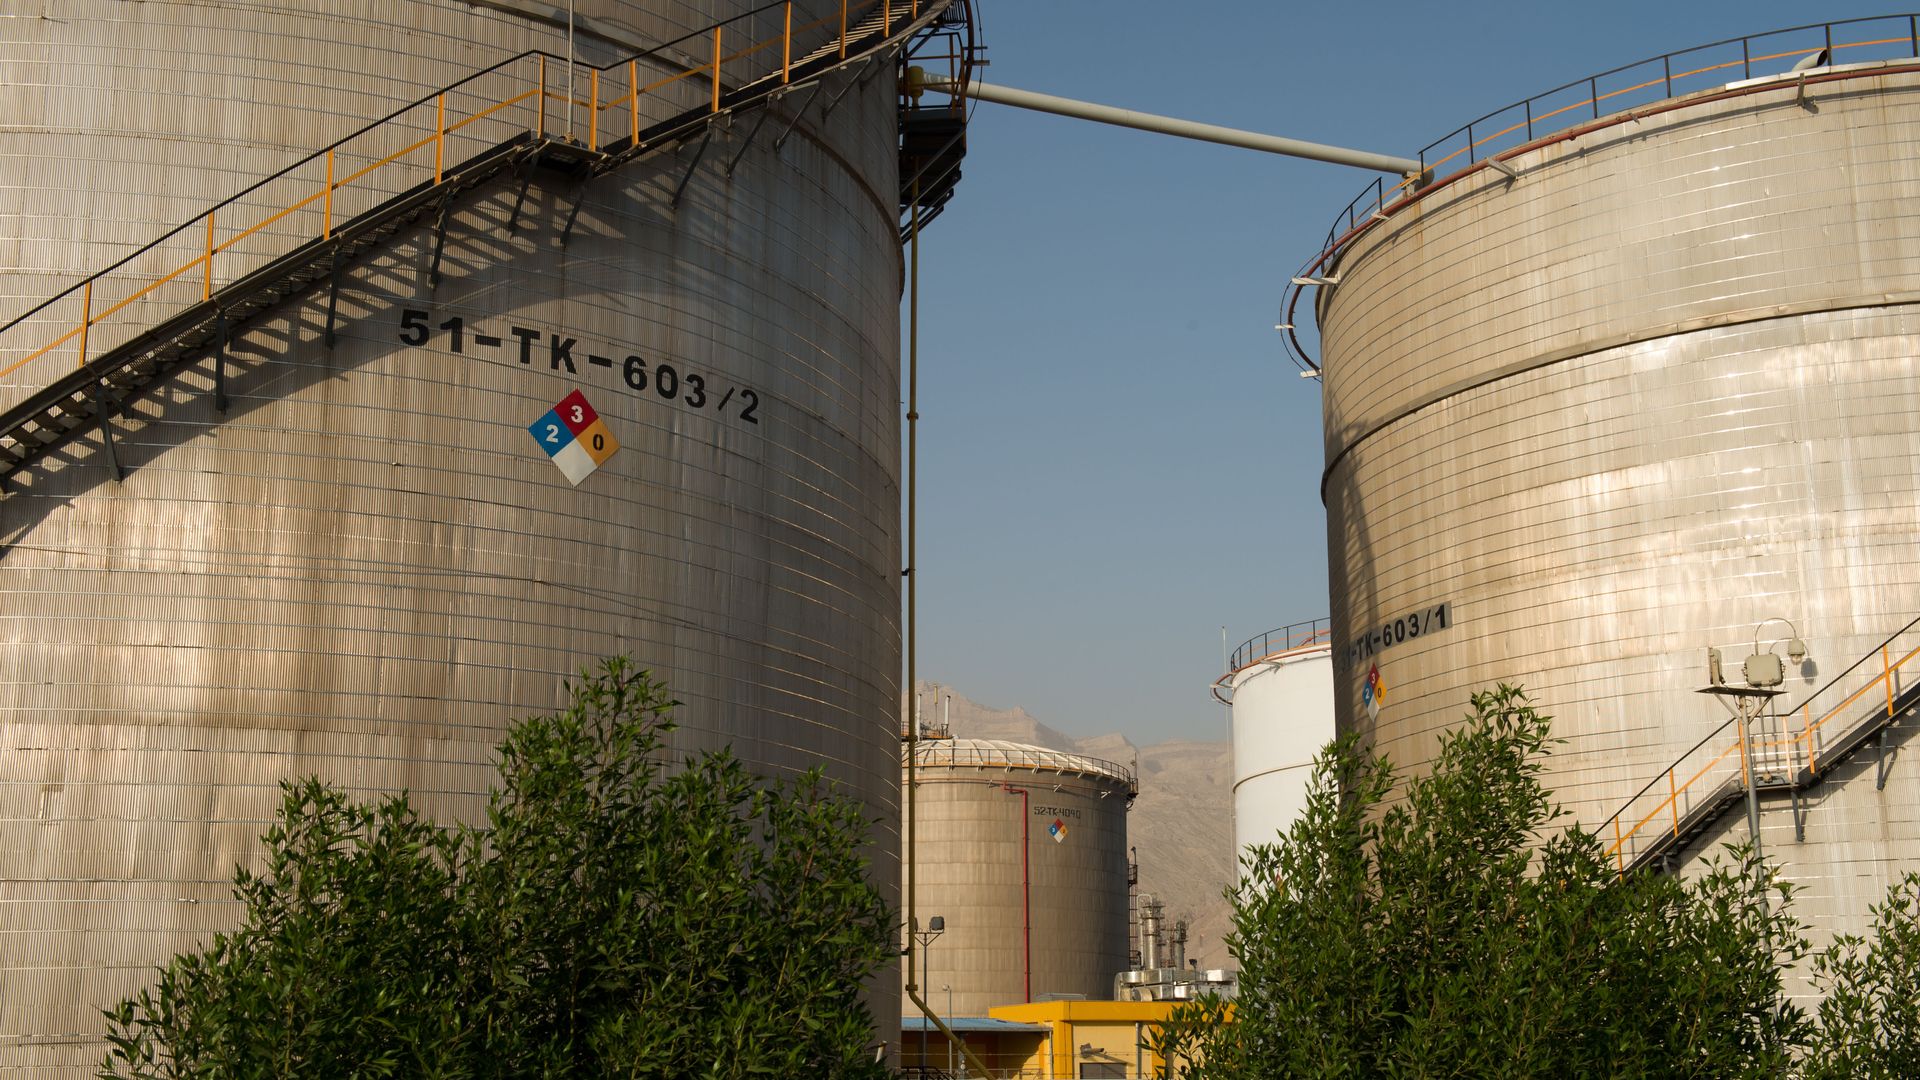 Chemical storage tanks stand at petrochemical complex in Iran